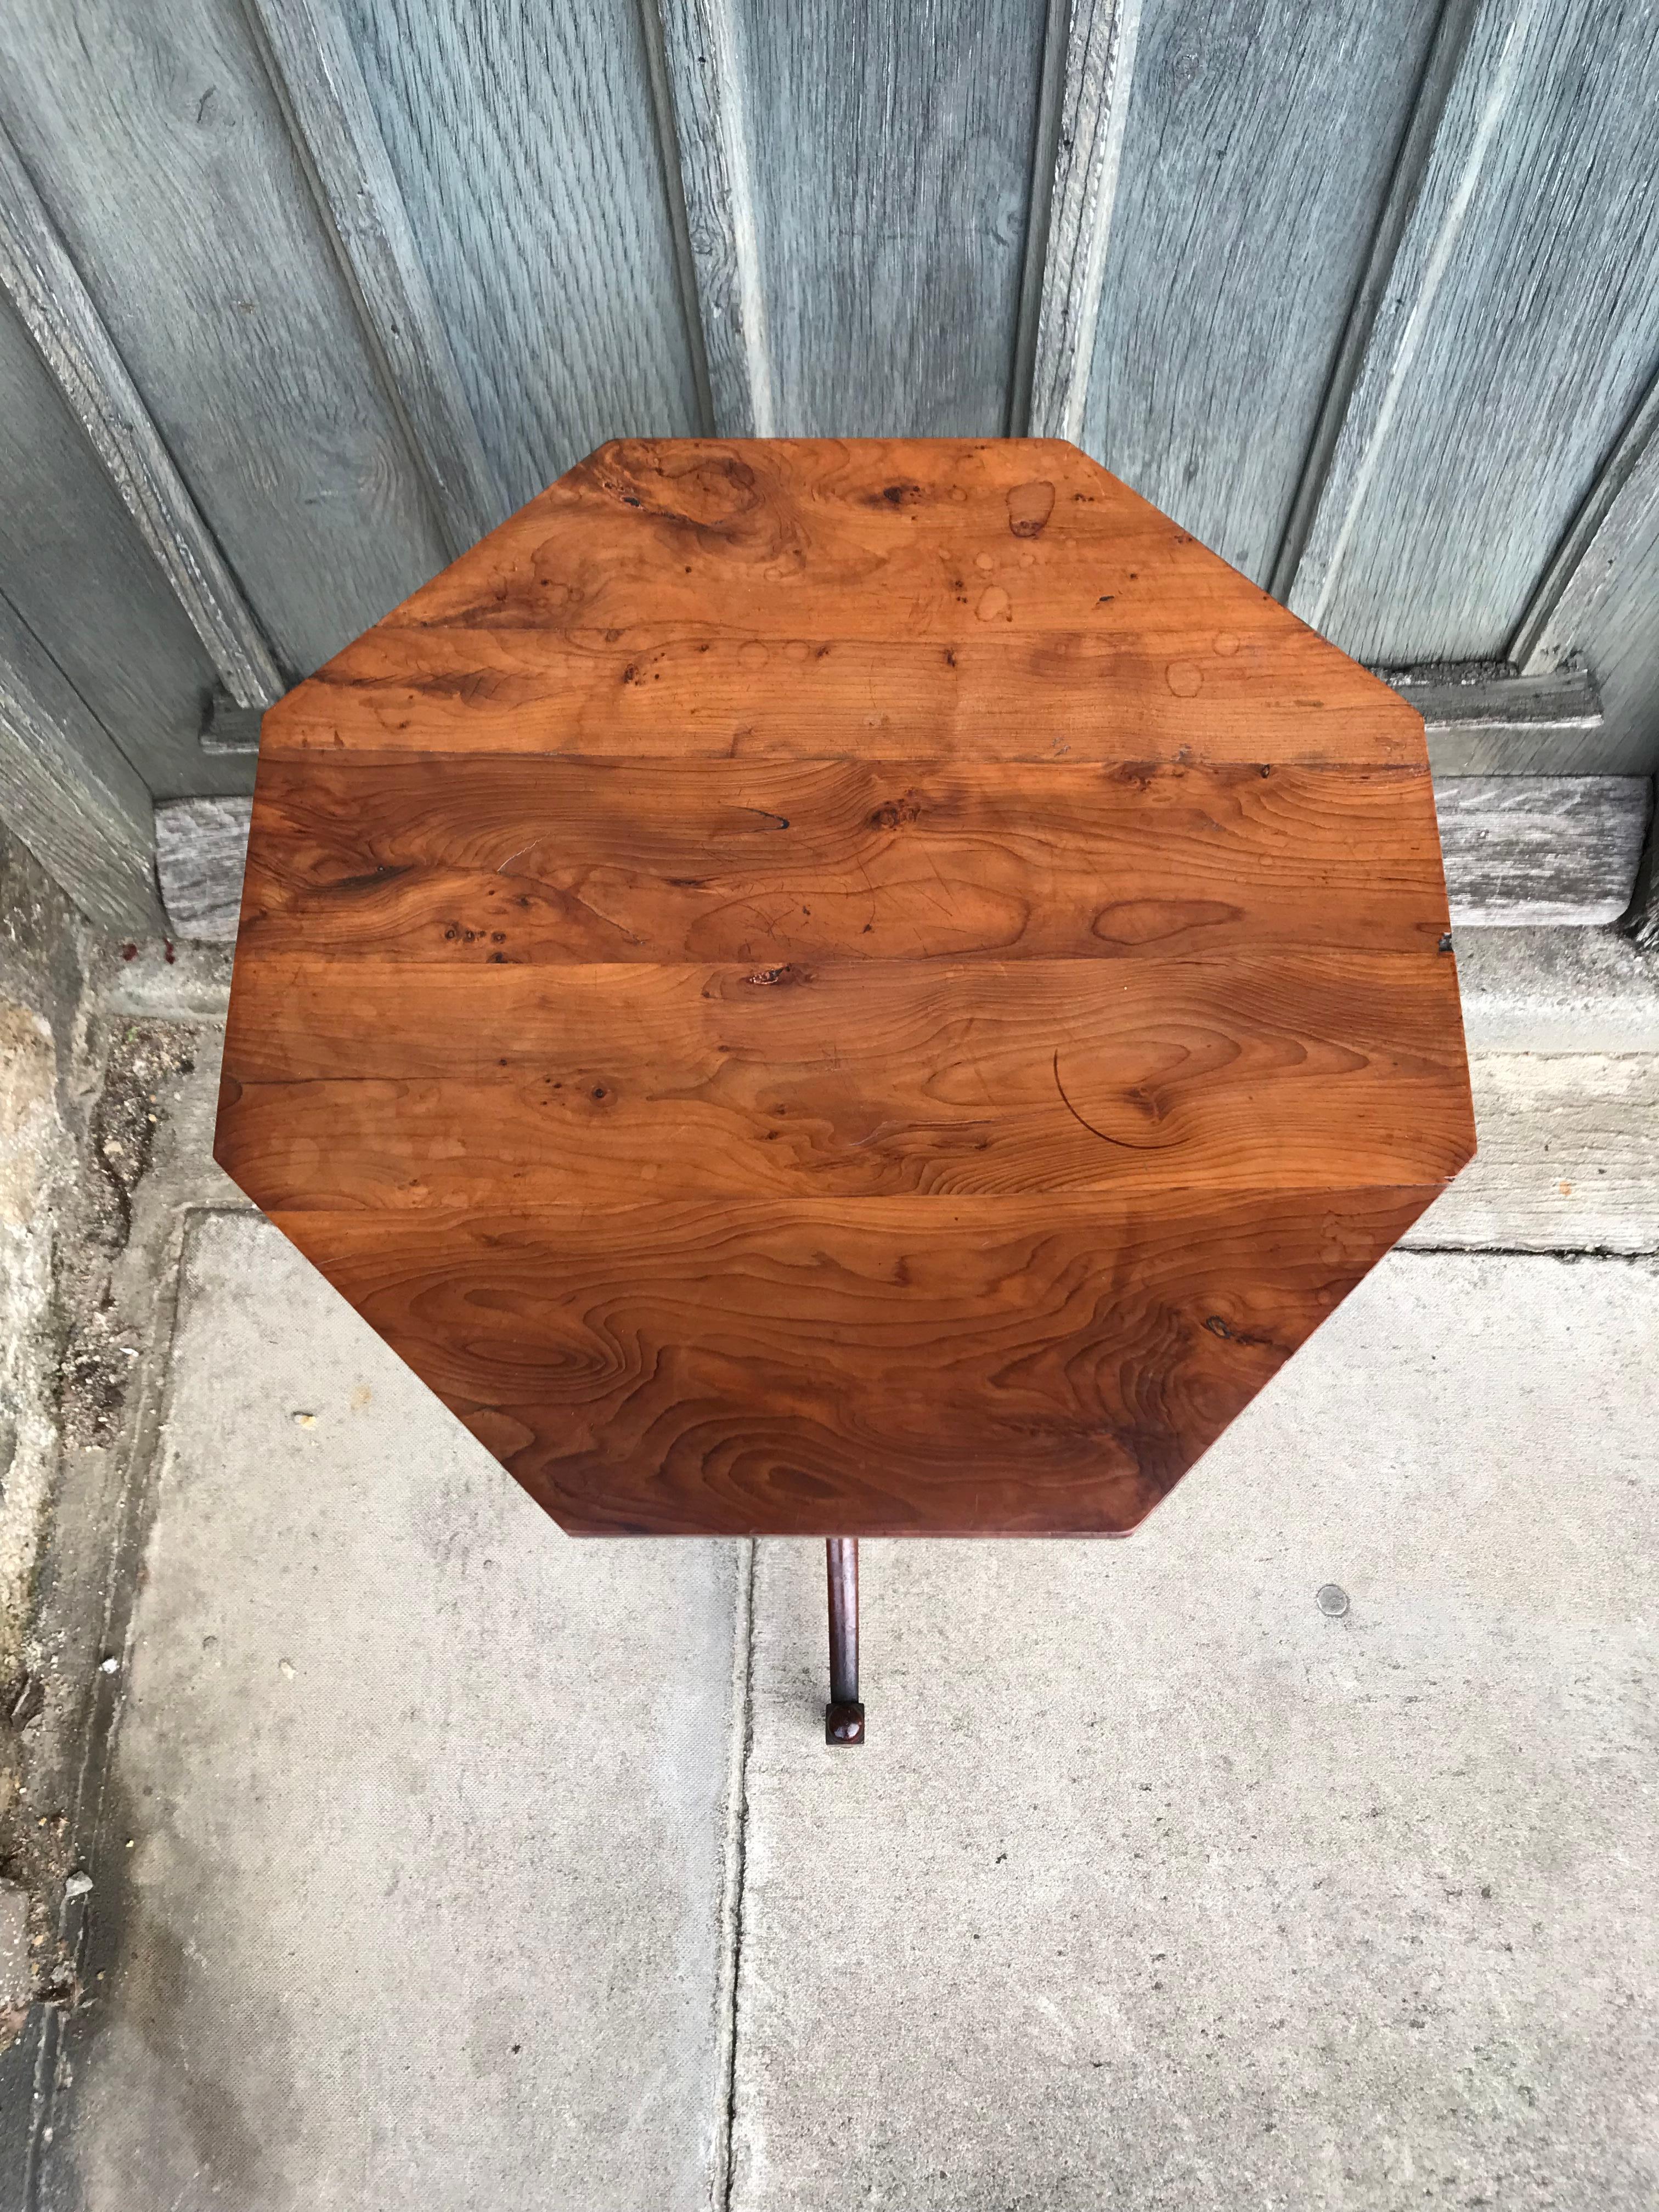 Antique English Regency small yew wood tripod table/kettle stand with a slender hexagonal top which rests on an ornate turned column, standing on fine swept sabre legs, finishing with square turned feet. This useful occasional table has an